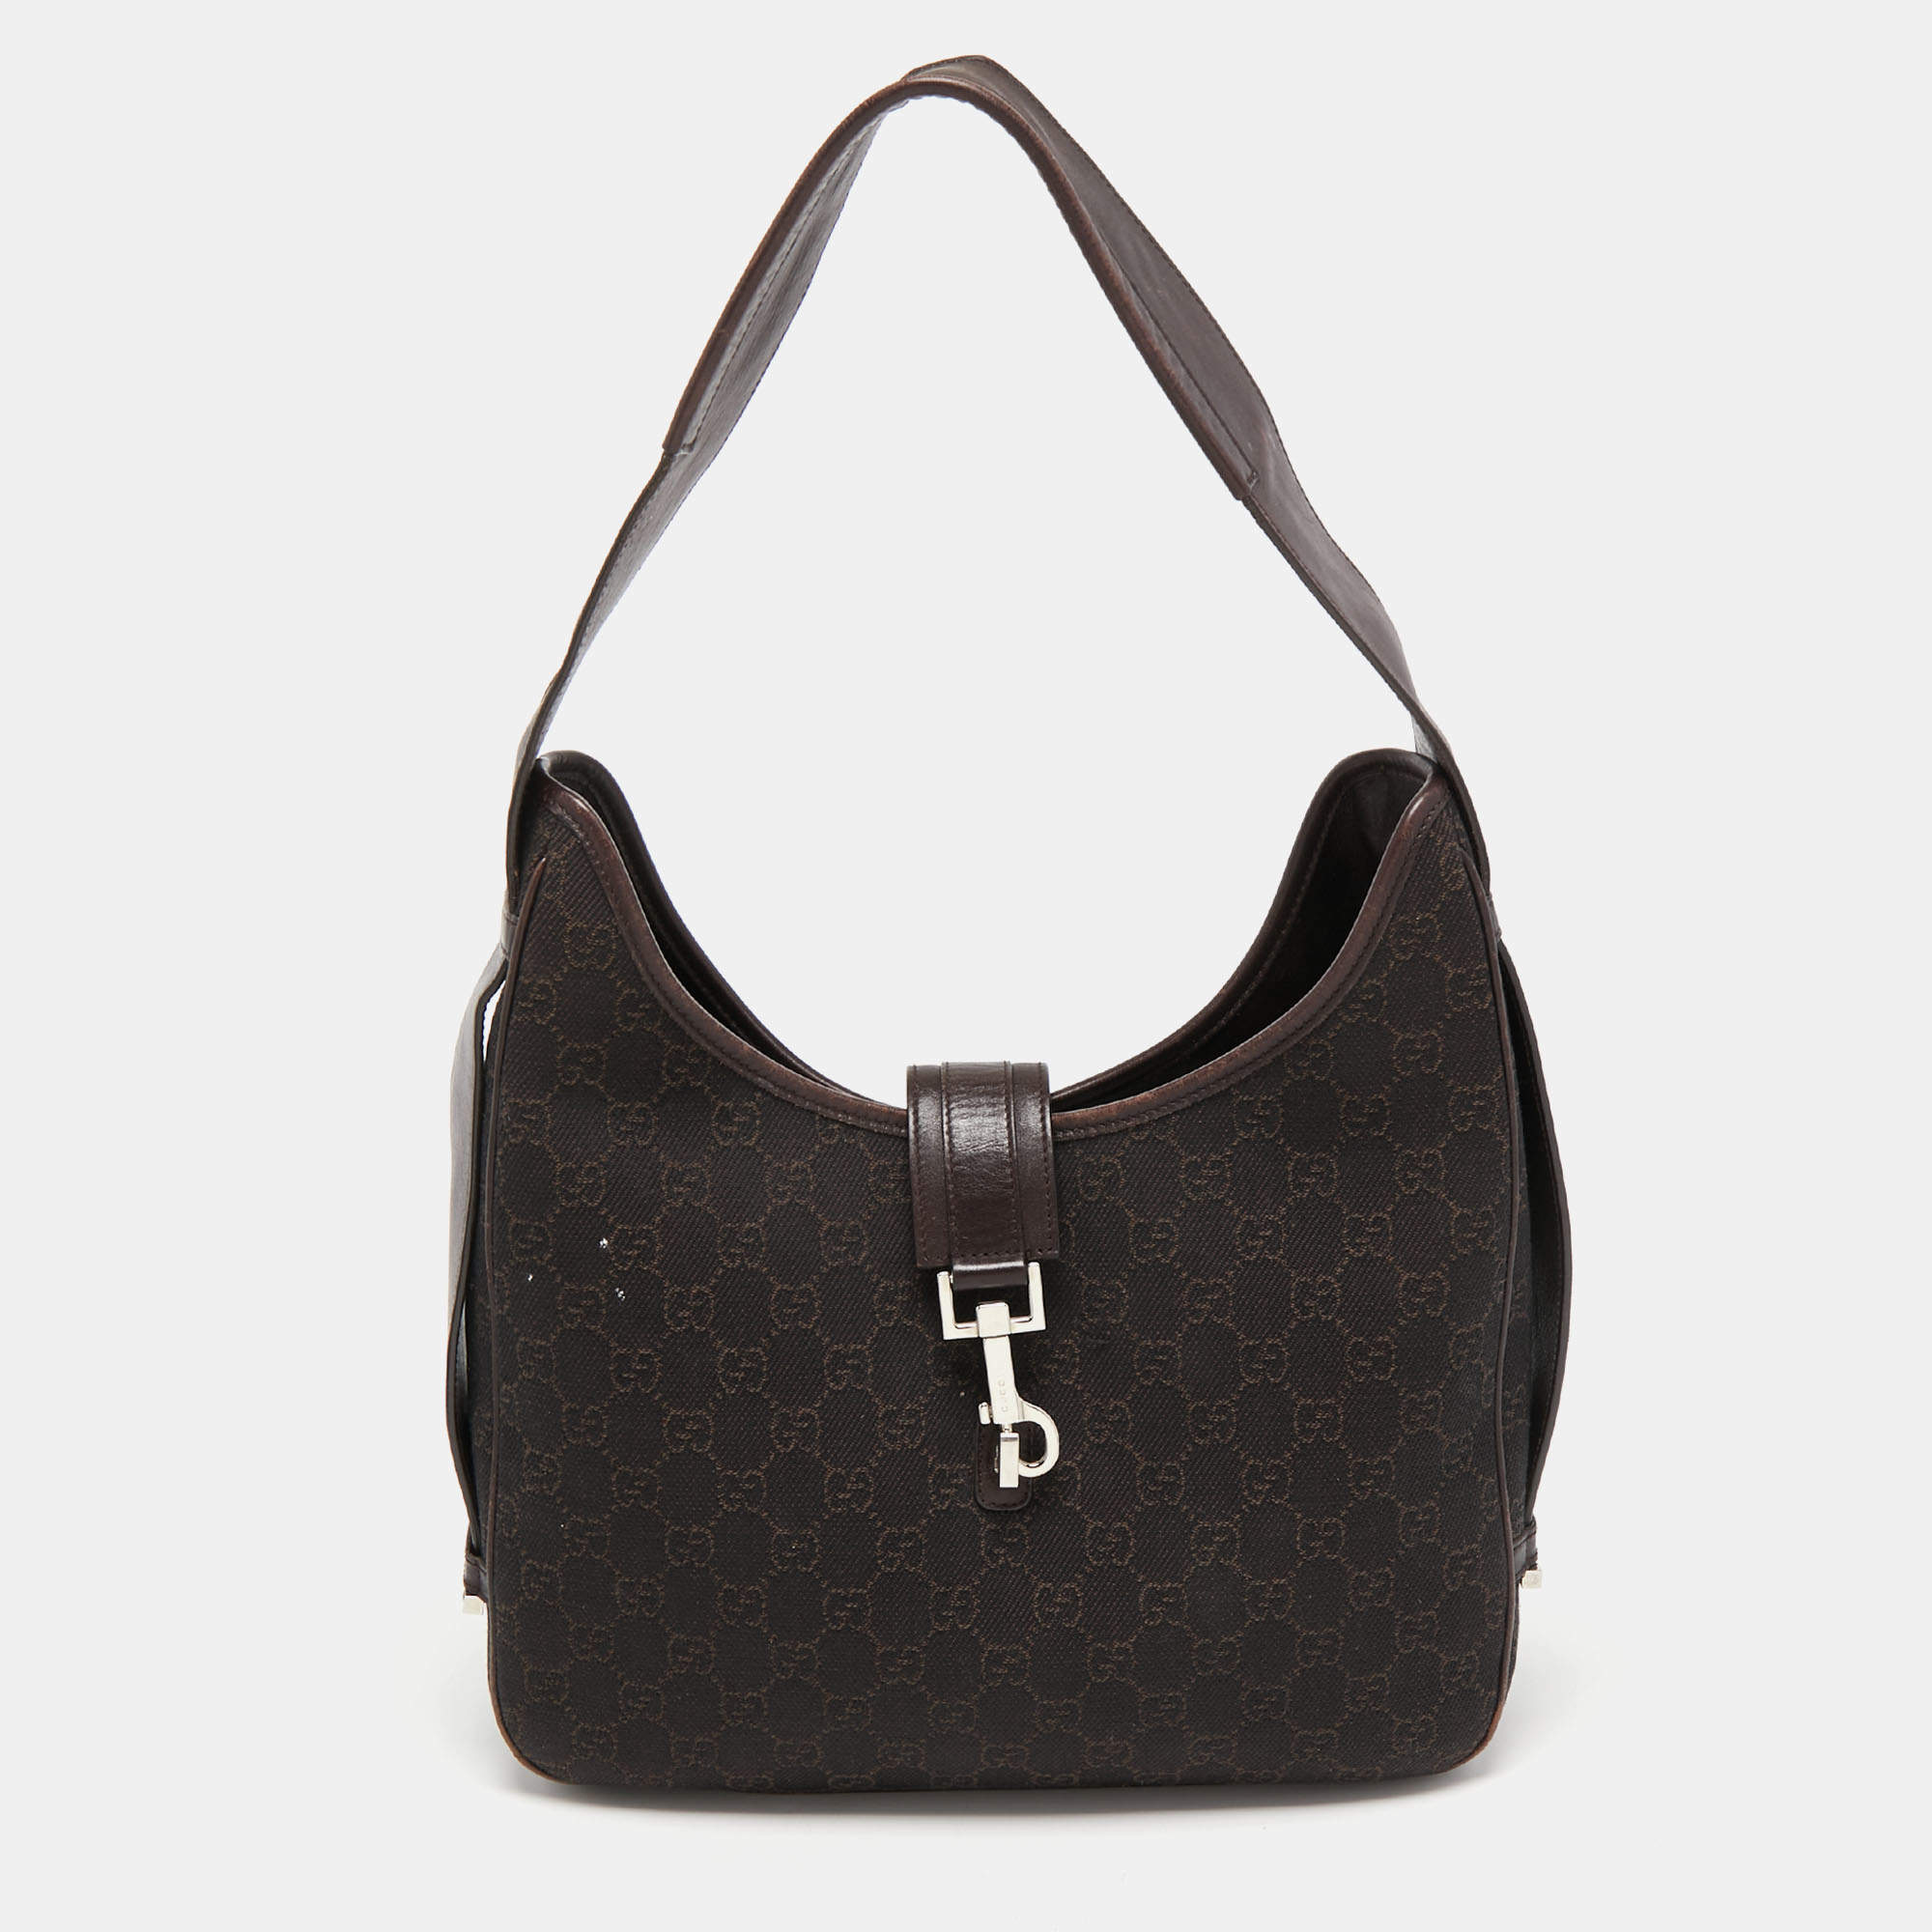 Gucci Brown GG Canvas and Leather Hobo